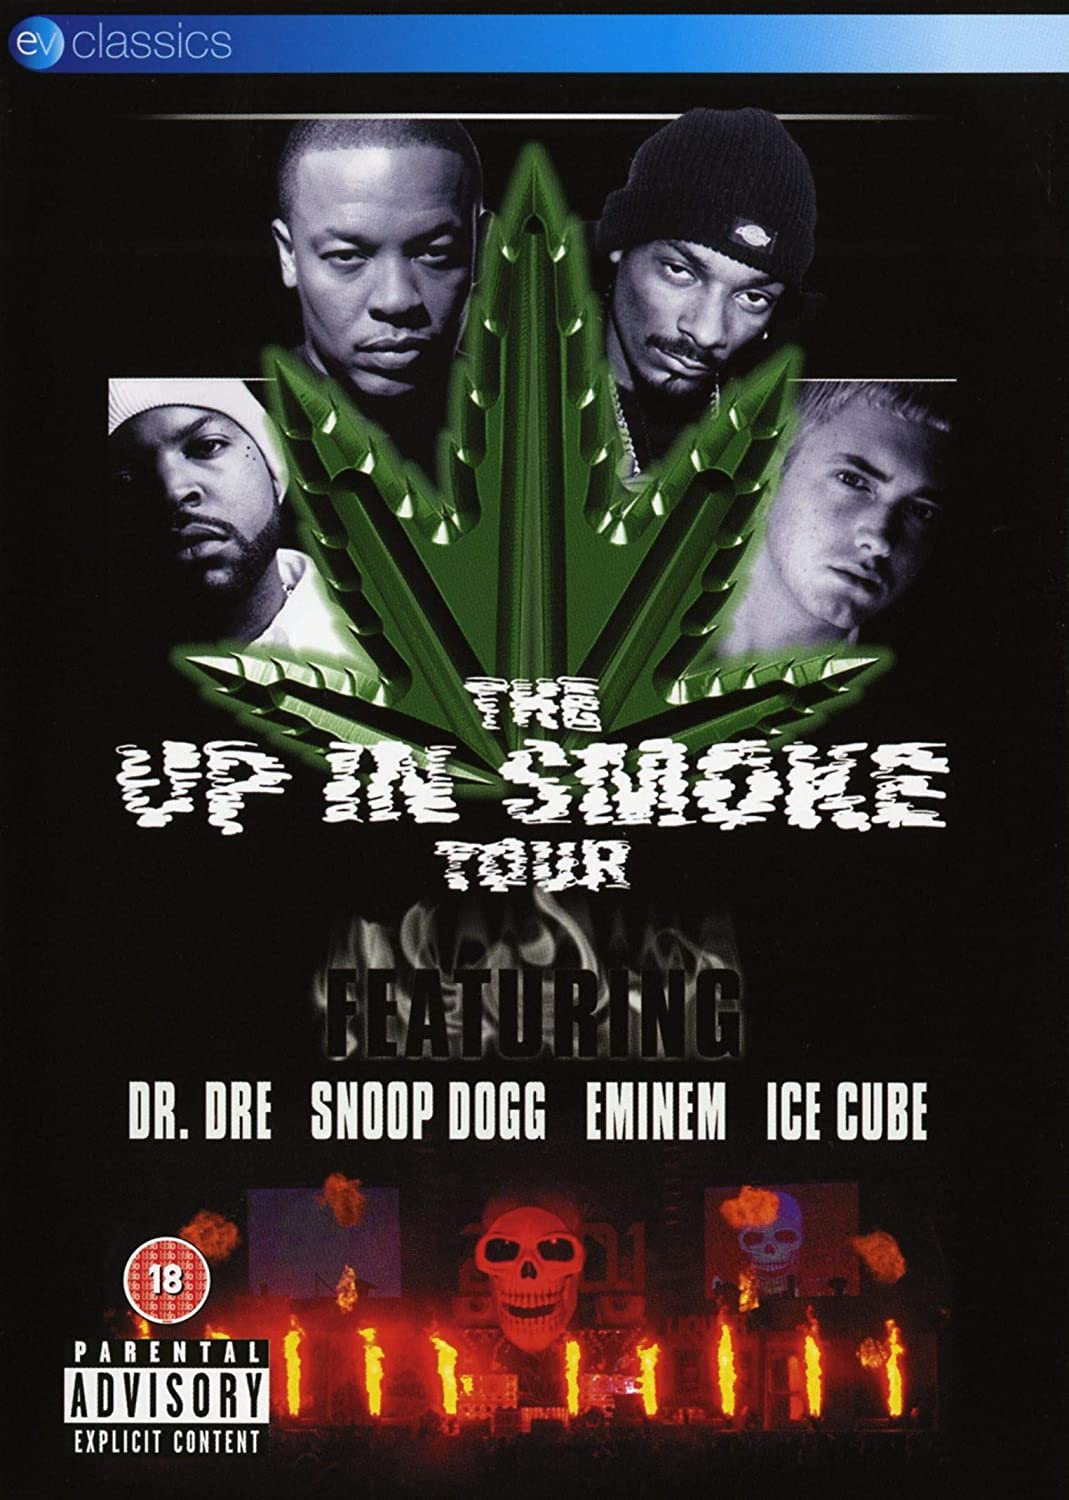 The Up In Smoke Tour [2009] - Hip hop [DVD]